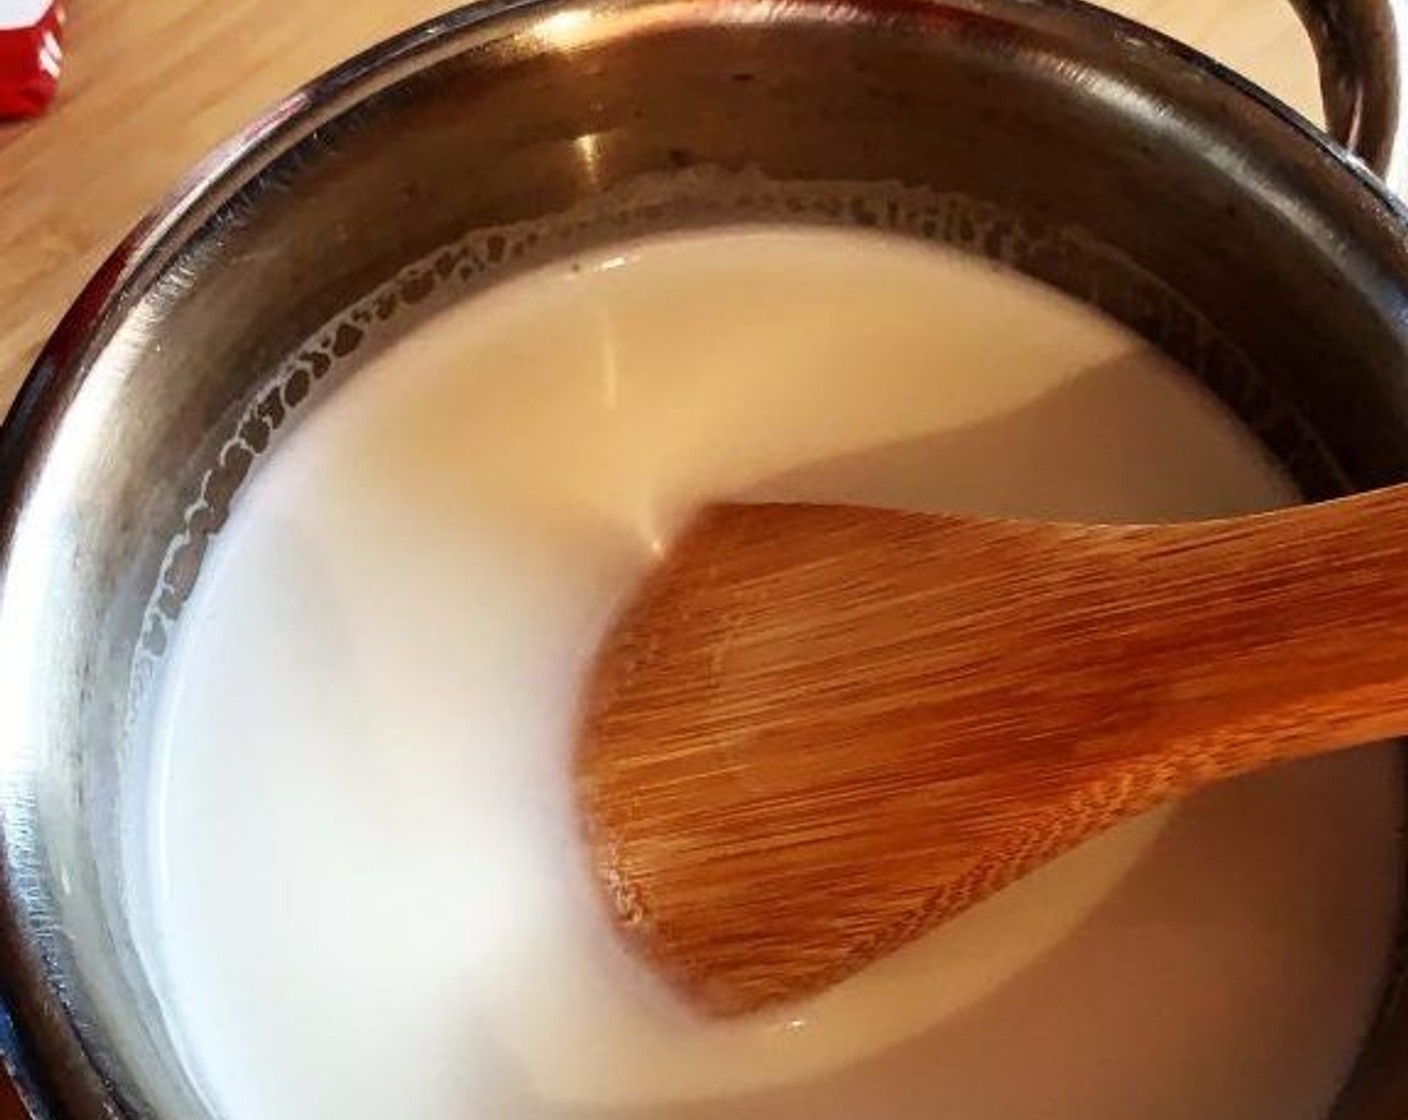 step 1 In a saucepan, heat up Whole Milk (13.5 oz) and Granulated Sugar (1/3 cup), turning off the heat just before it reaches boiling point. Stir well to make sure the sugar has dissolved